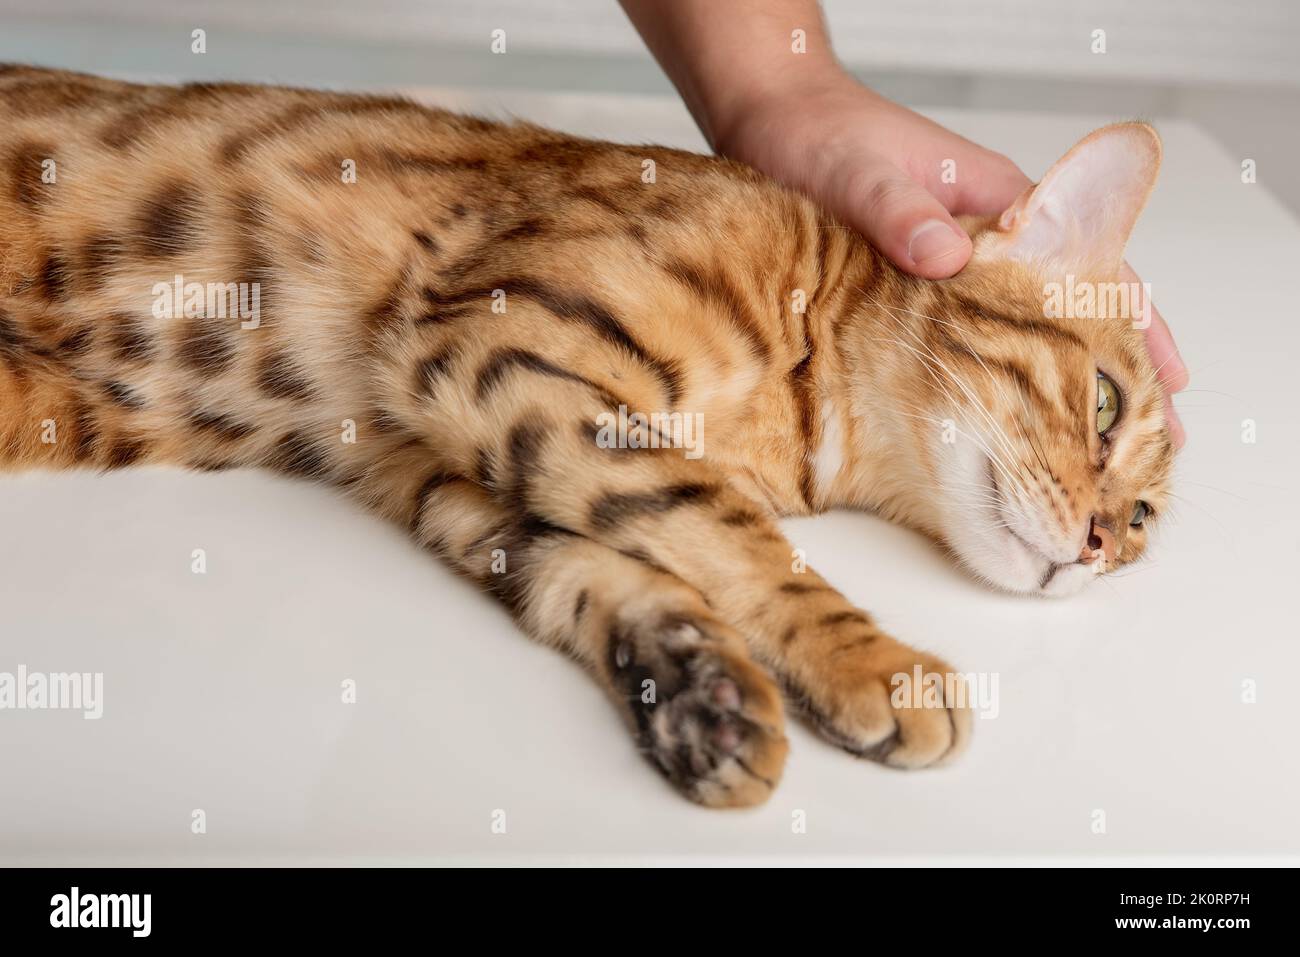 The owner affectionately strokes his Bengal cat. Love for pets. Stock Photo